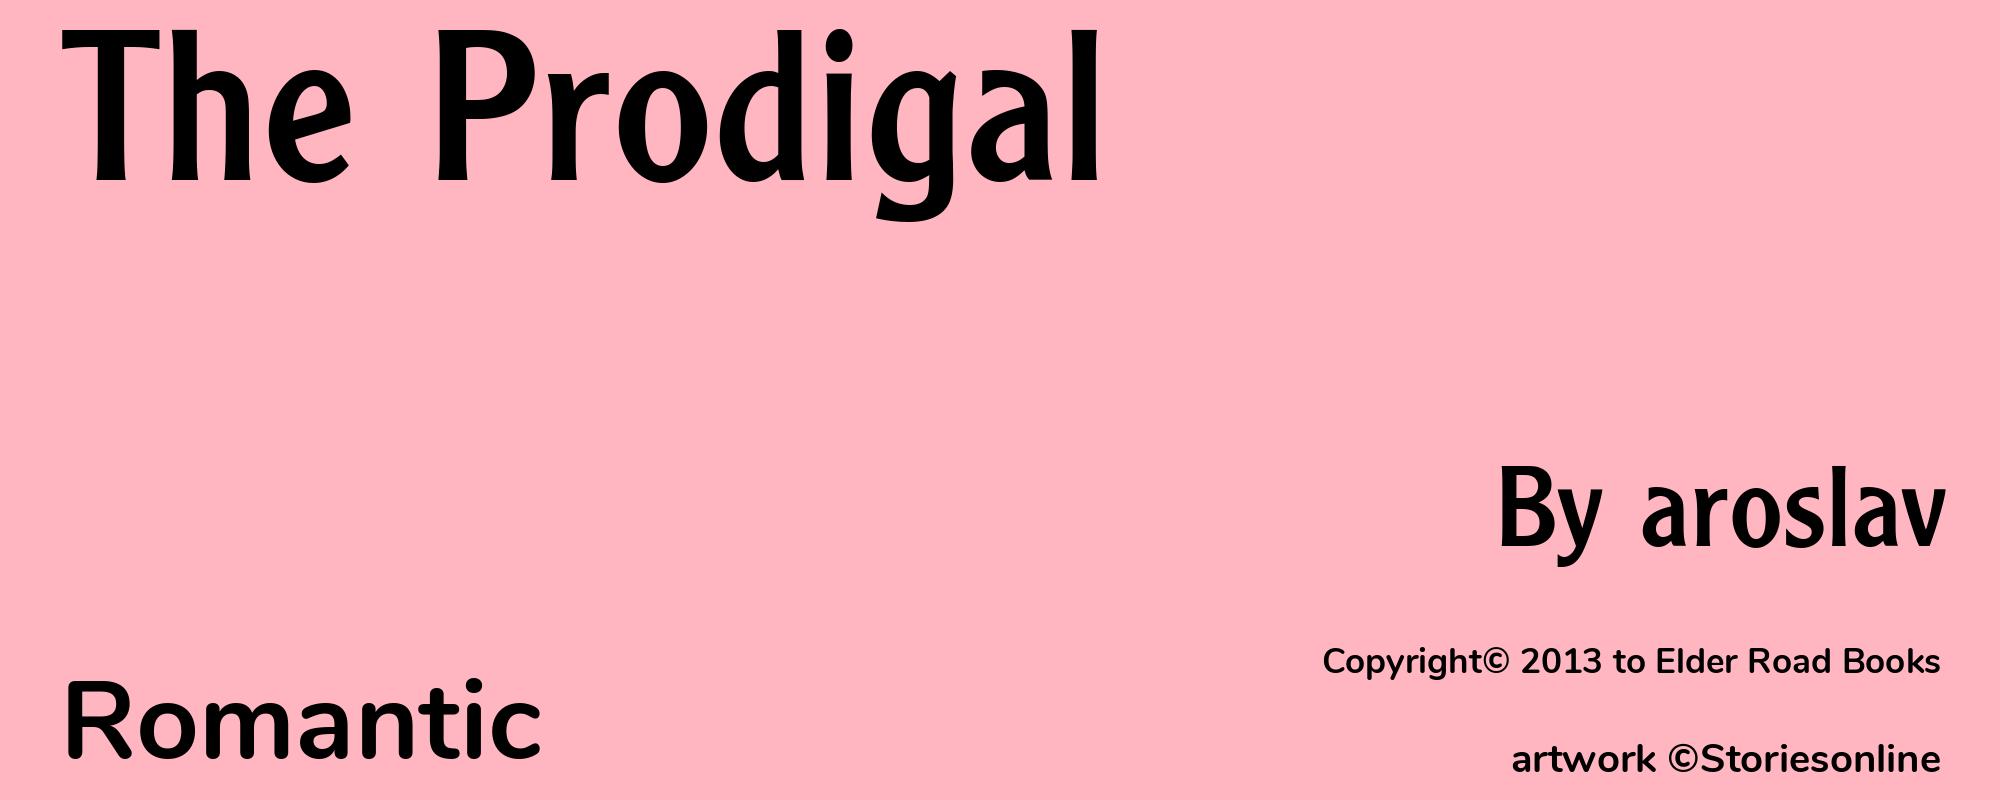 The Prodigal - Cover